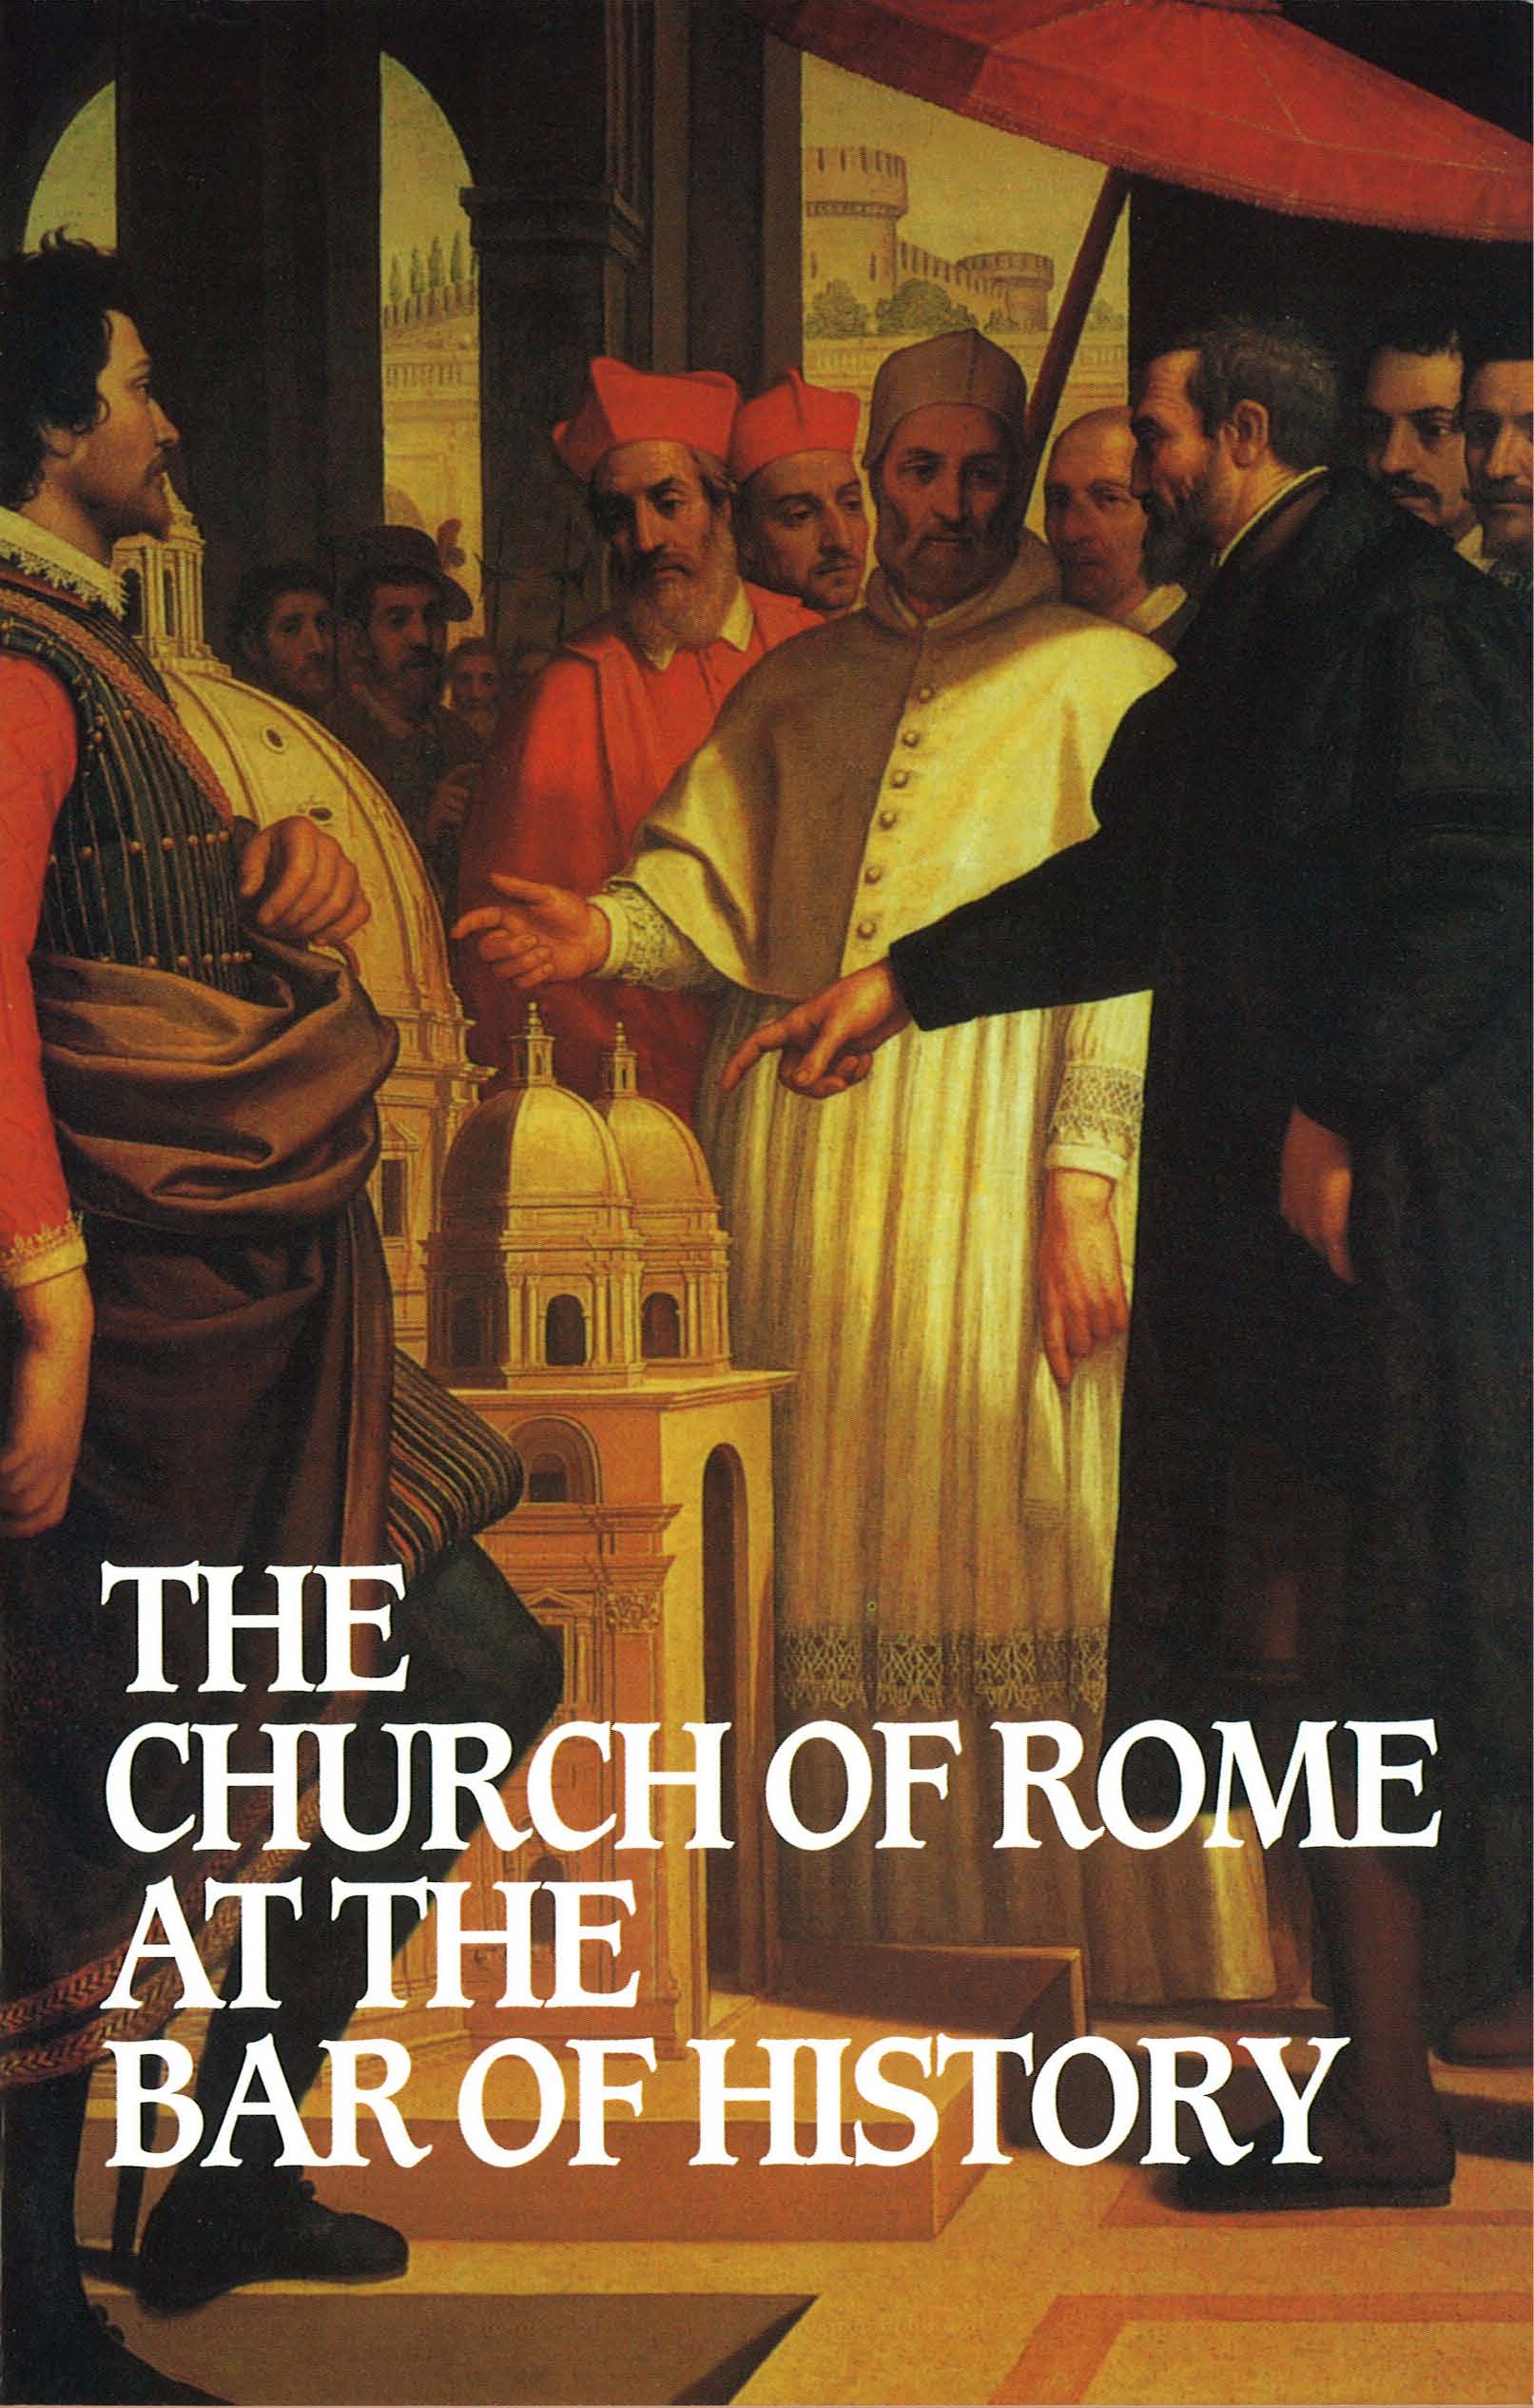 Book Cover For 'Church Of Rome At The Bar Of History'